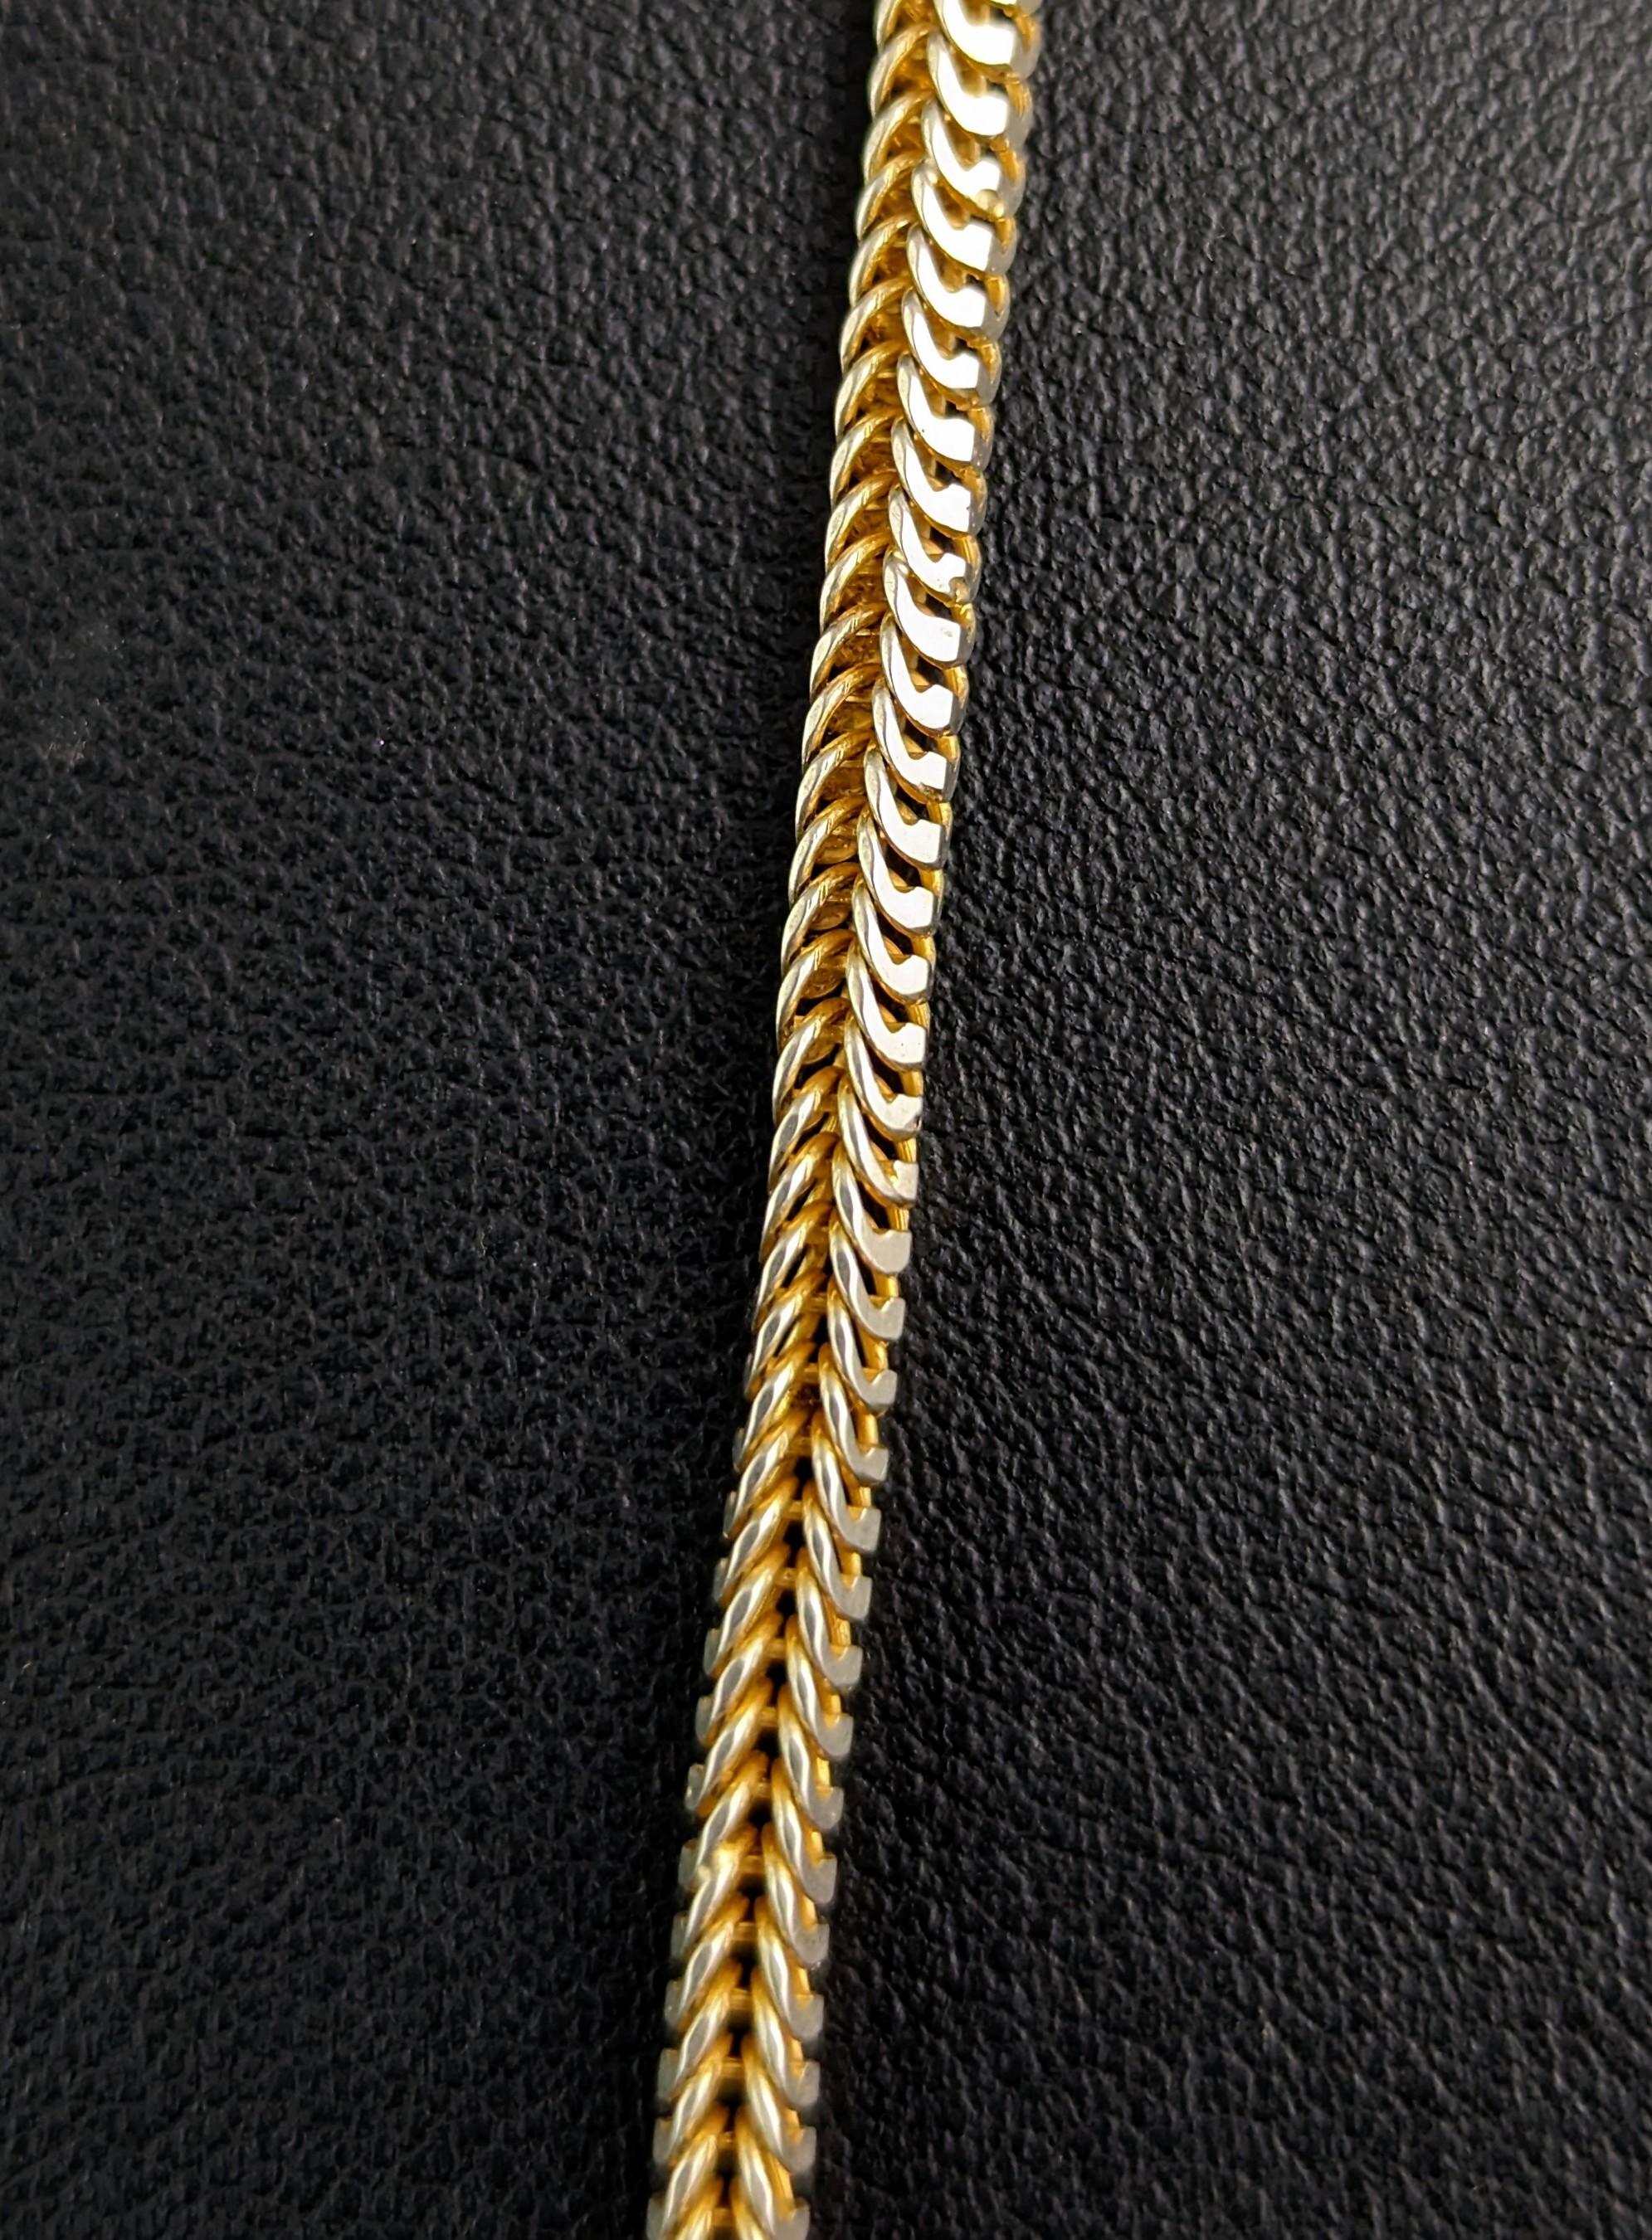 Antique Victorian gilt metal longuard chain necklace, muff chain  For Sale 3